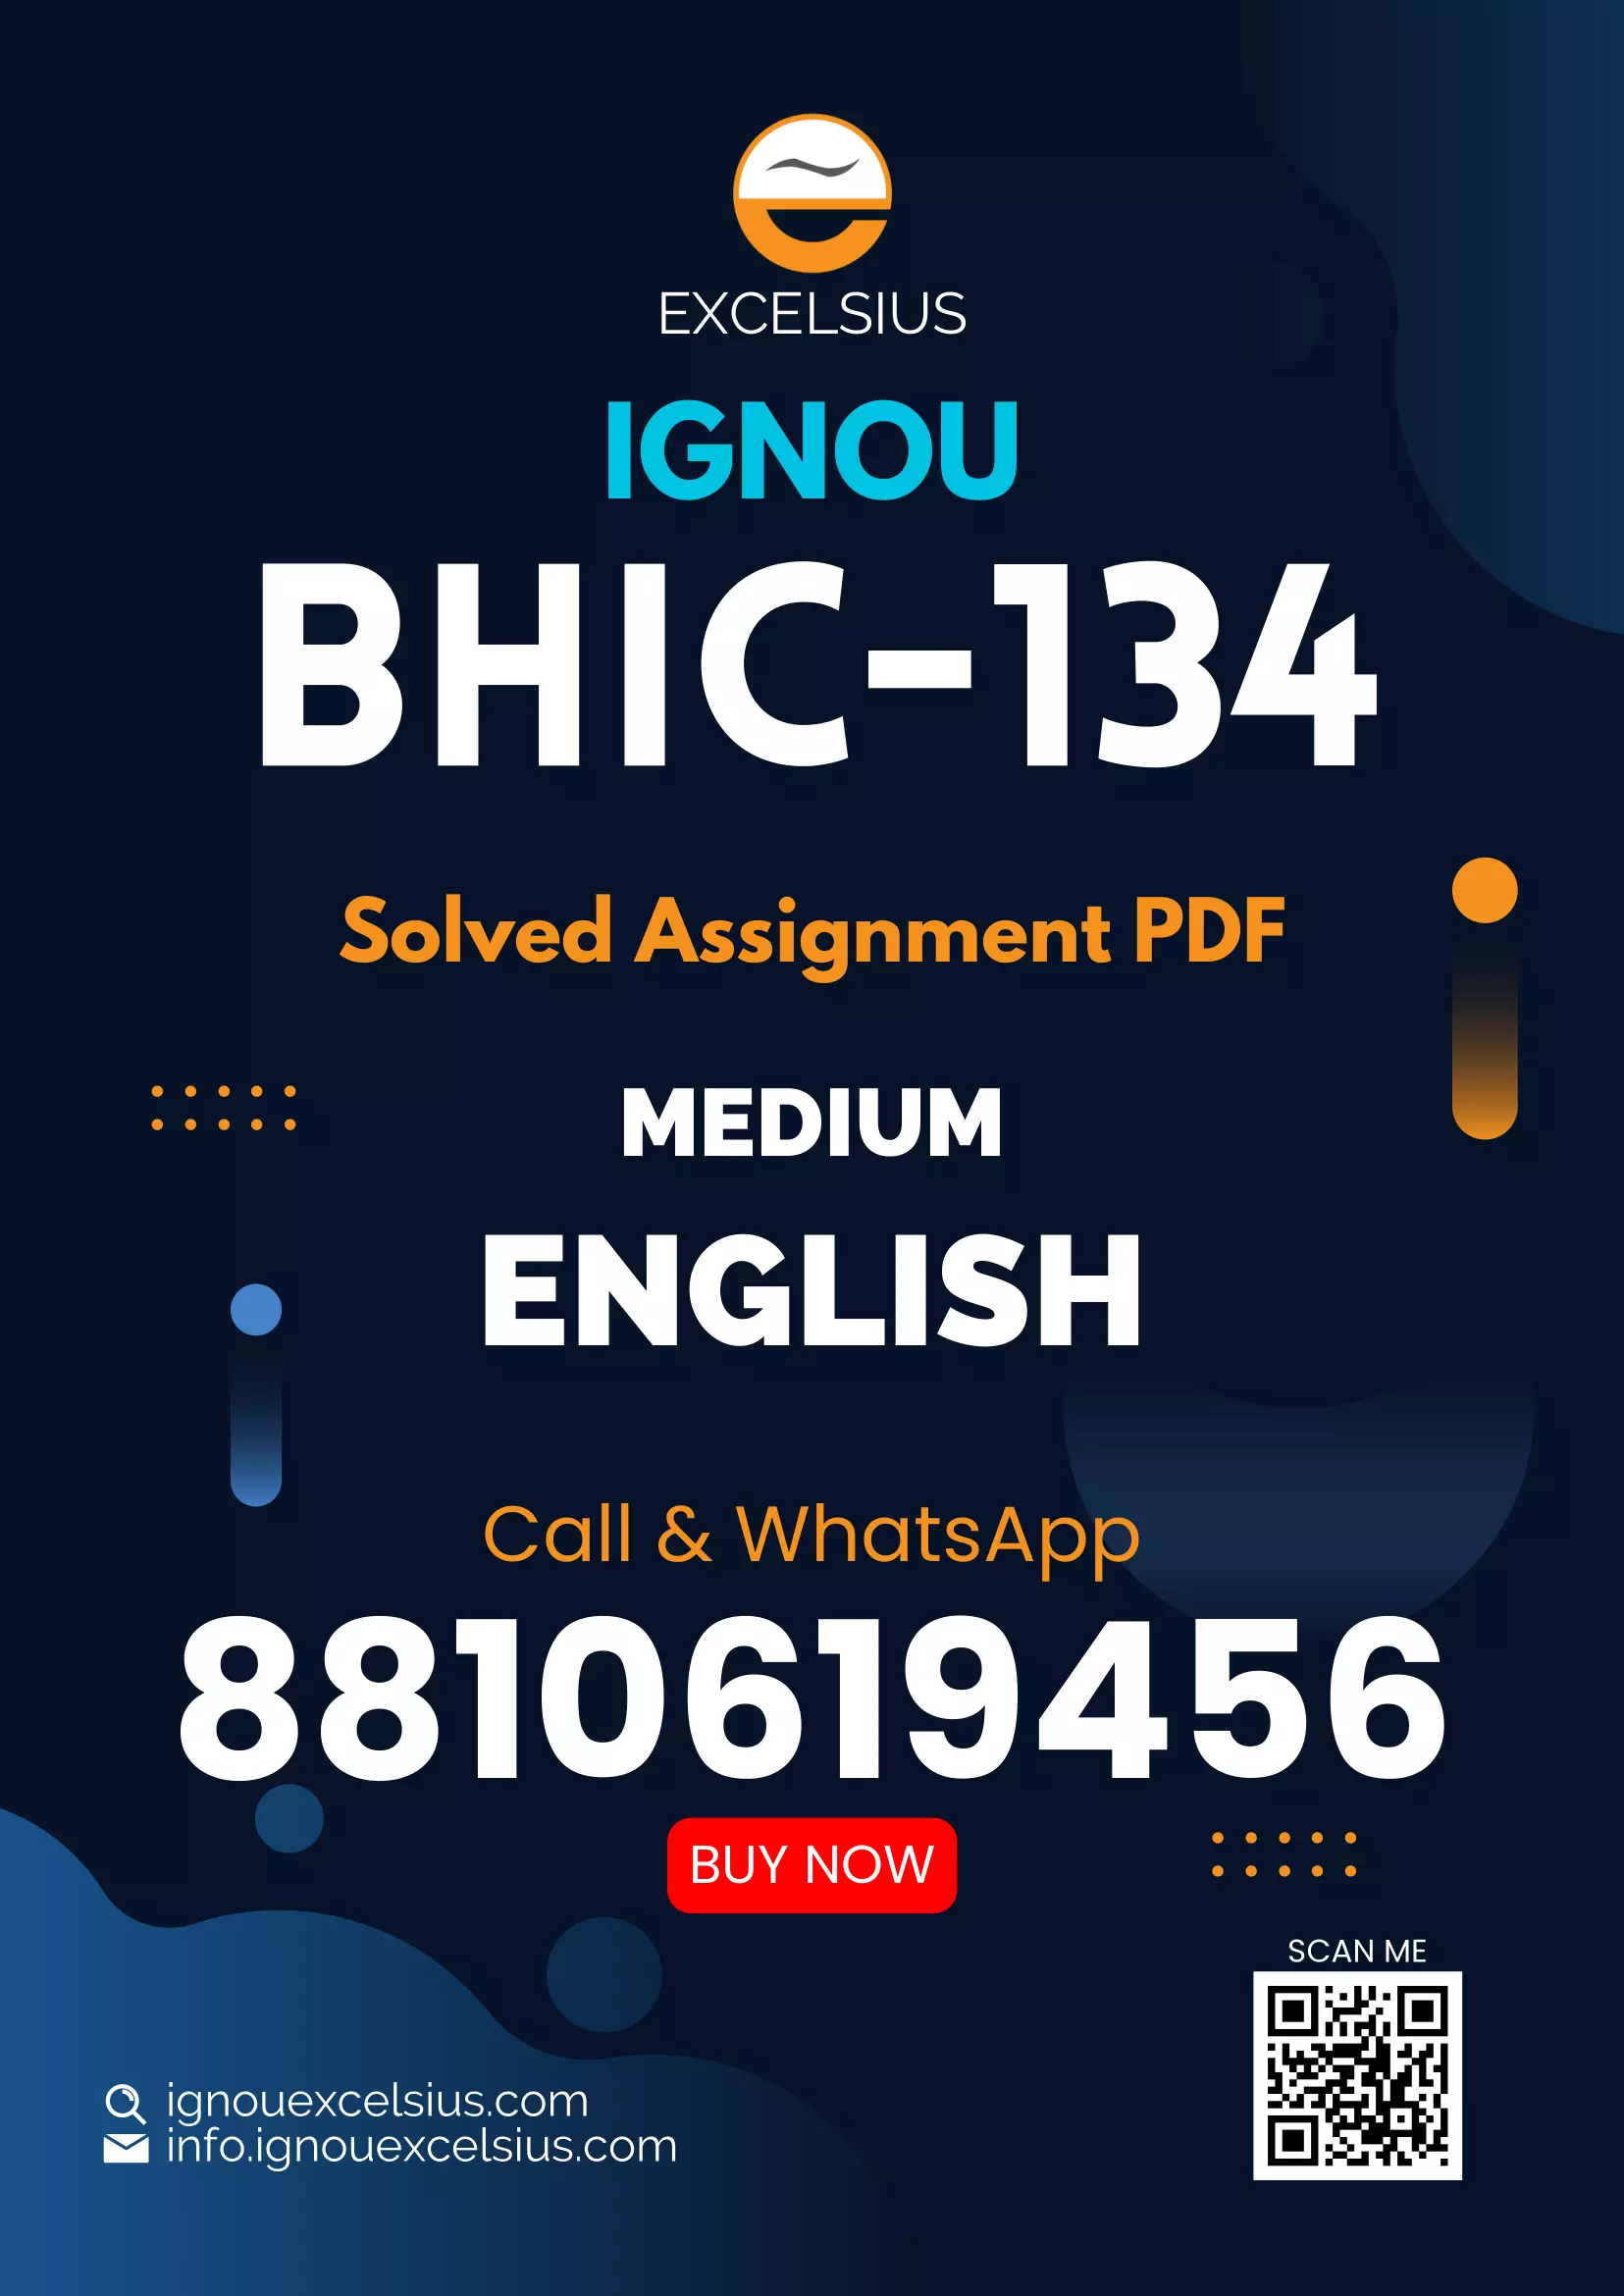 IGNOU BHIC-134 - History of India: 1707-1950 Latest Solved Assignment-July 2022 – January 2023